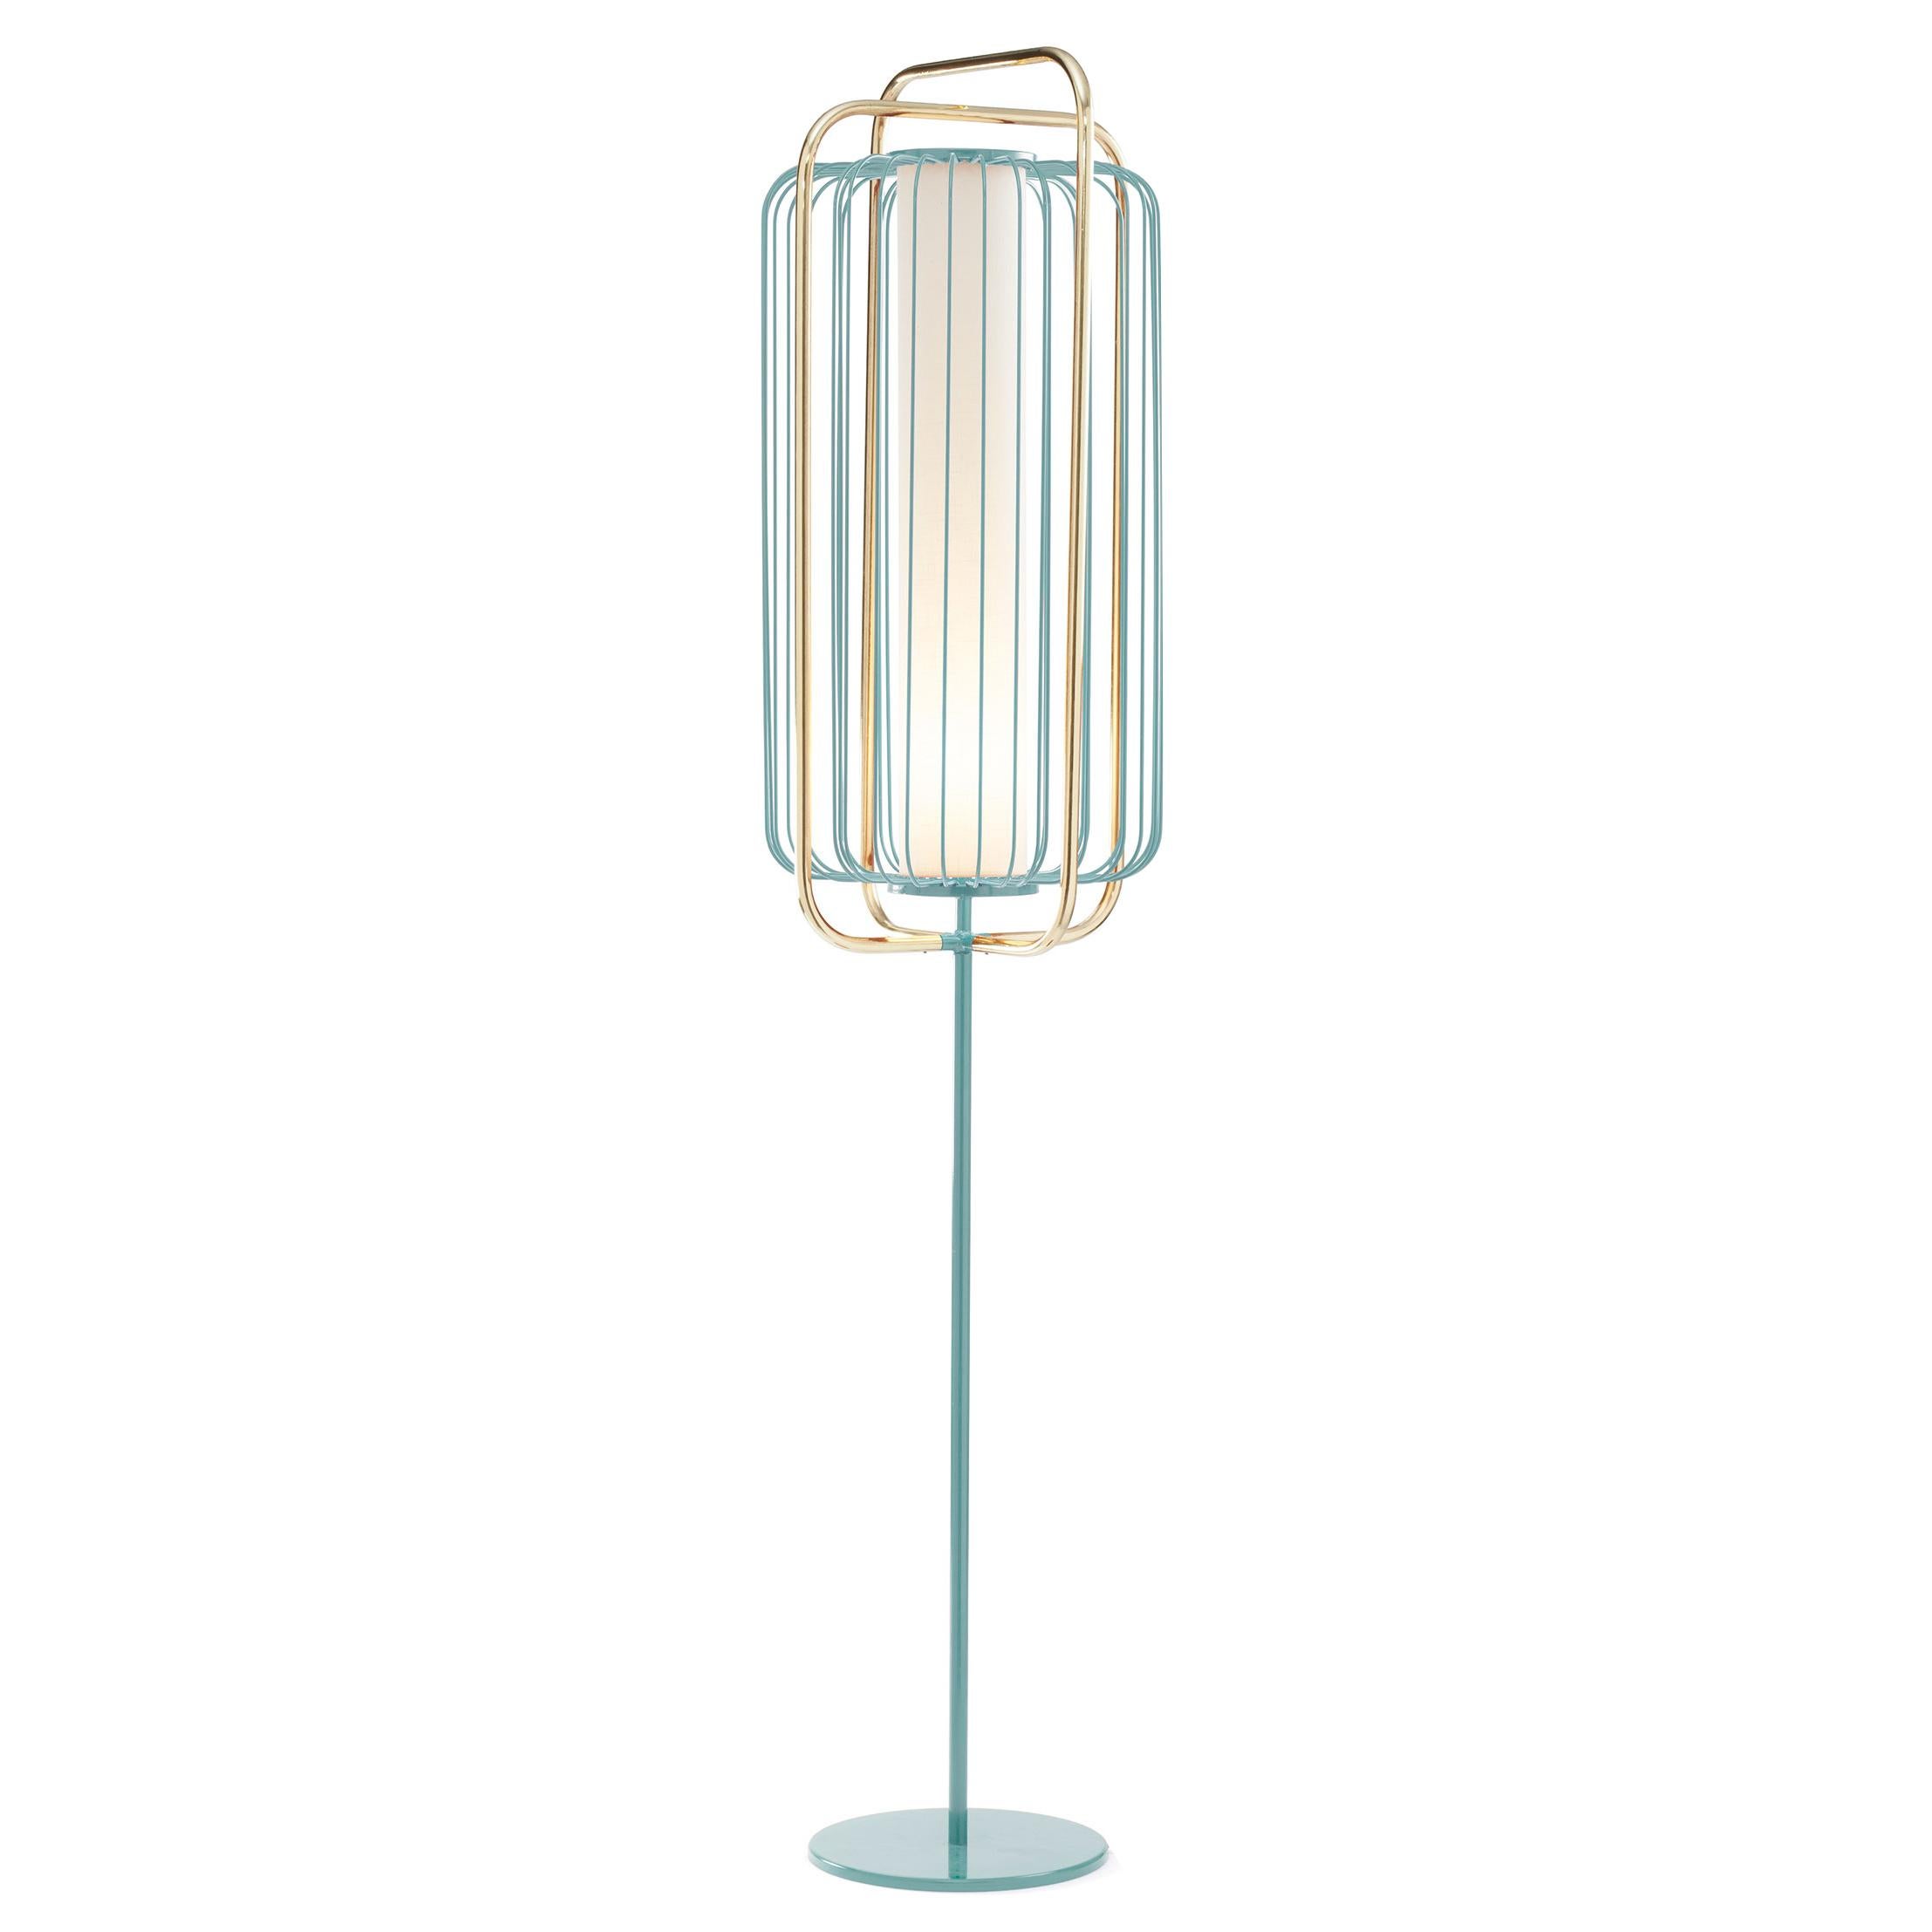 Jules floor lamp is all about a timeless, effortless sophistication. A perfect combination of polished brass or copper with fun lacquered metal colors and a soft and elegant linen shade that softly diffuses the light enclosed in the structure.
The